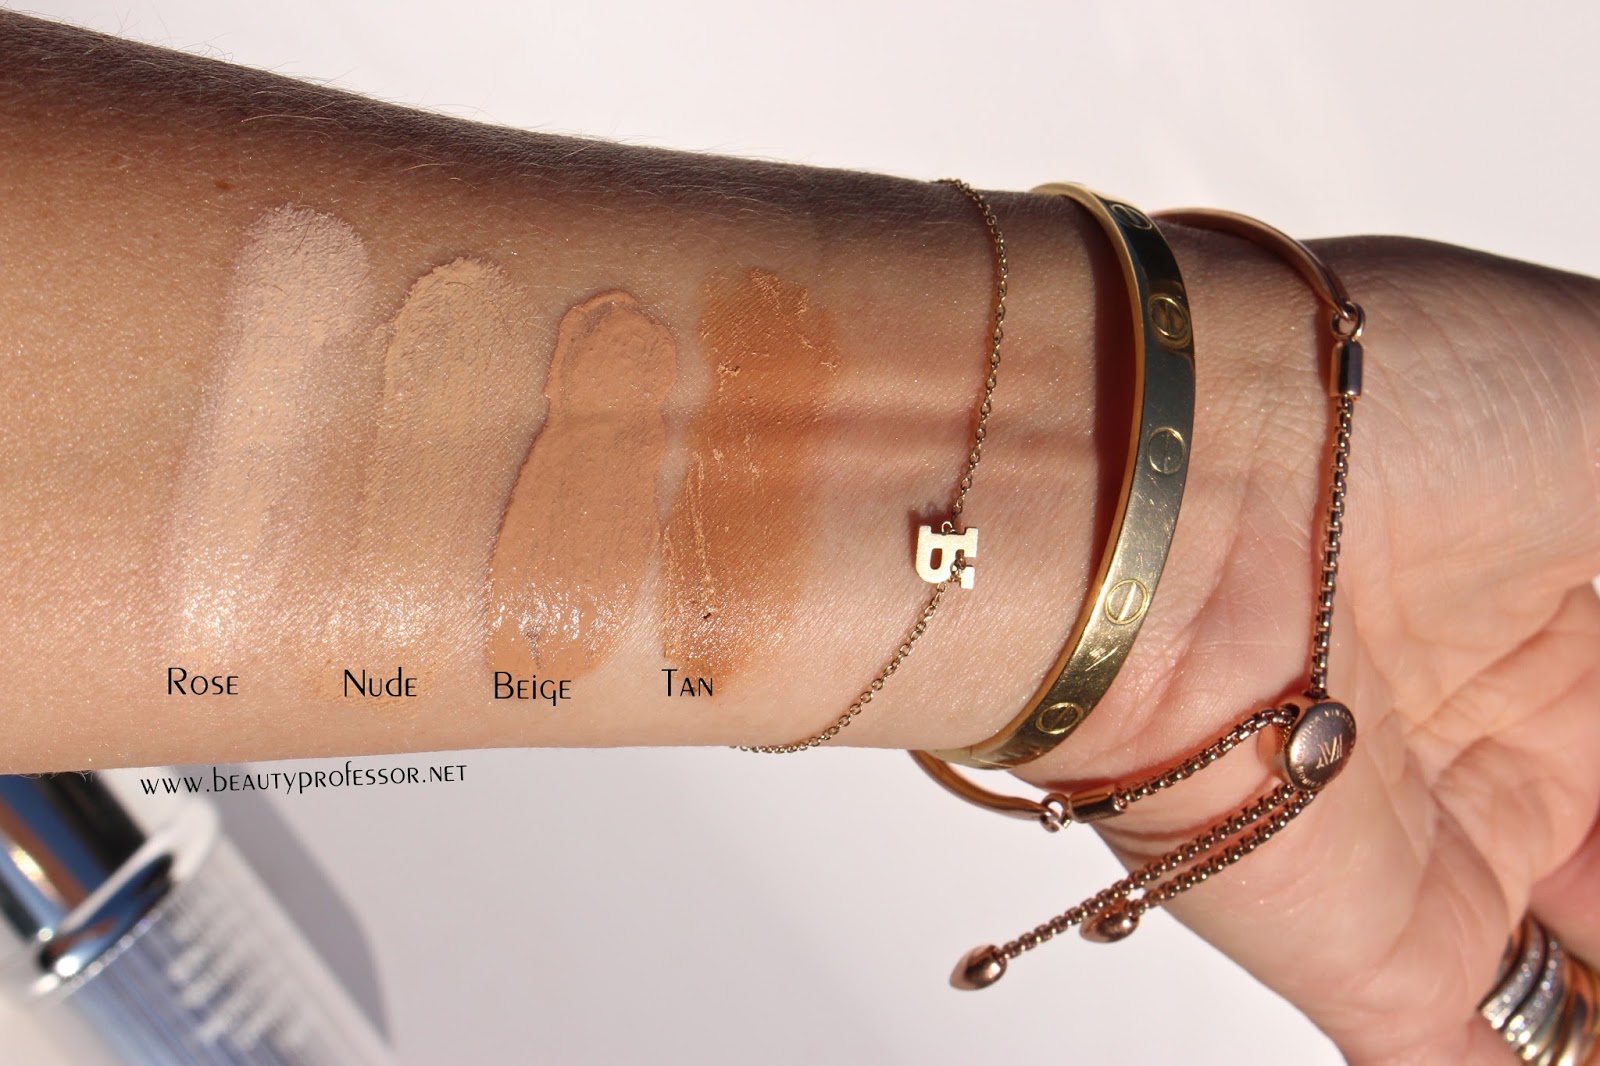 Swatches in direct sunlight. 